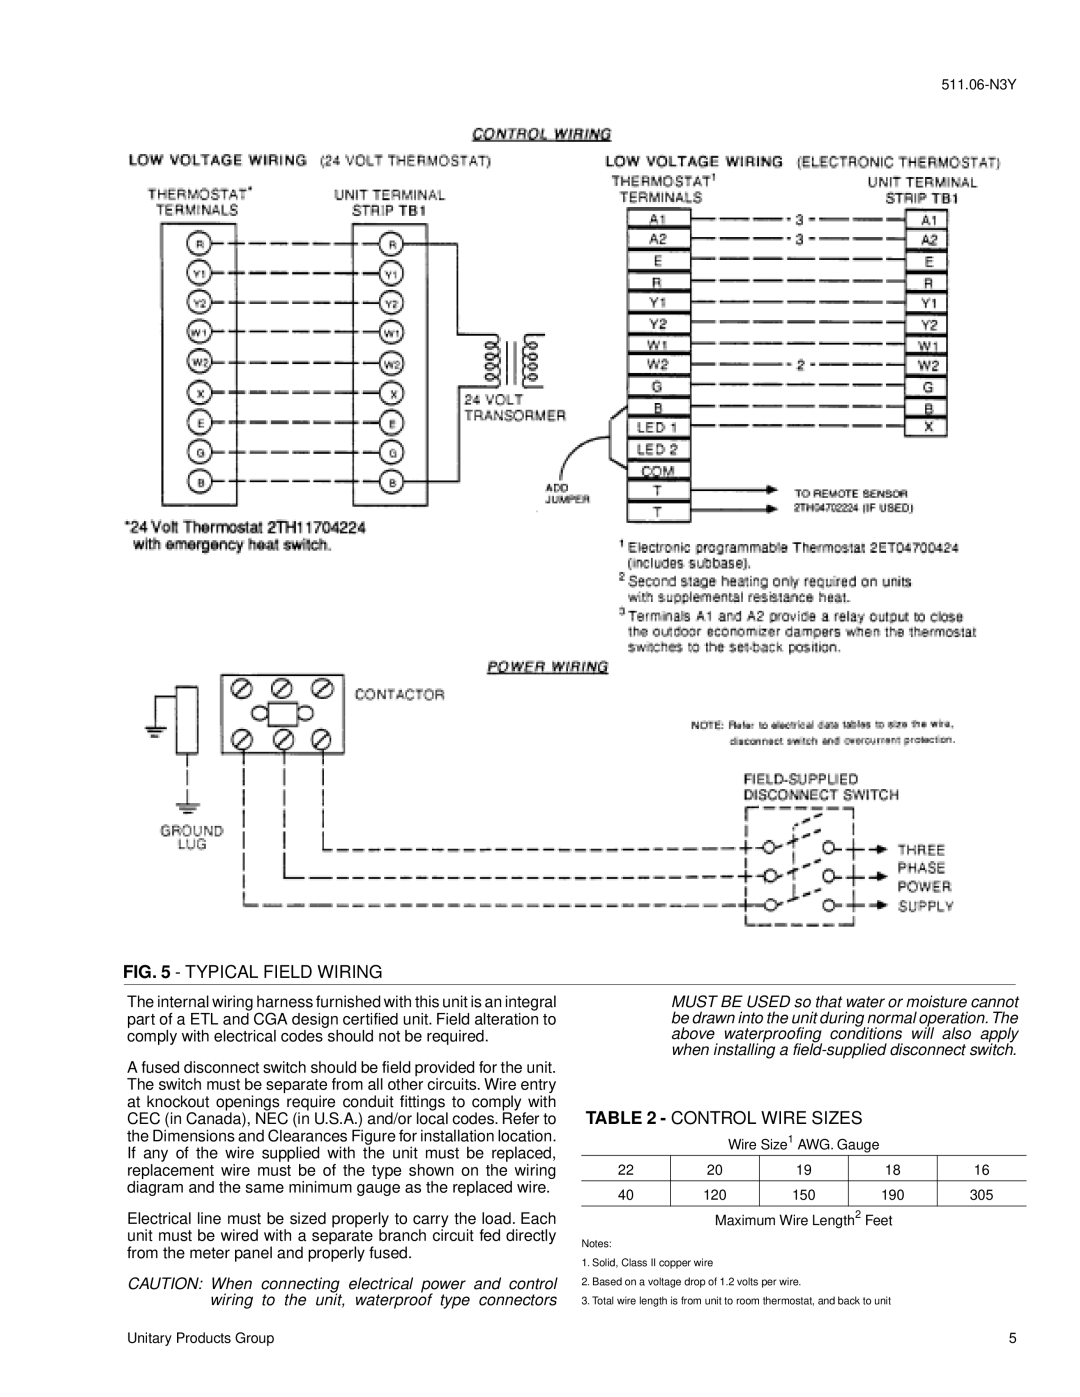 York B1CH240, B1CH180 installation instructions Typical Field Wiring, Control Wire Sizes 